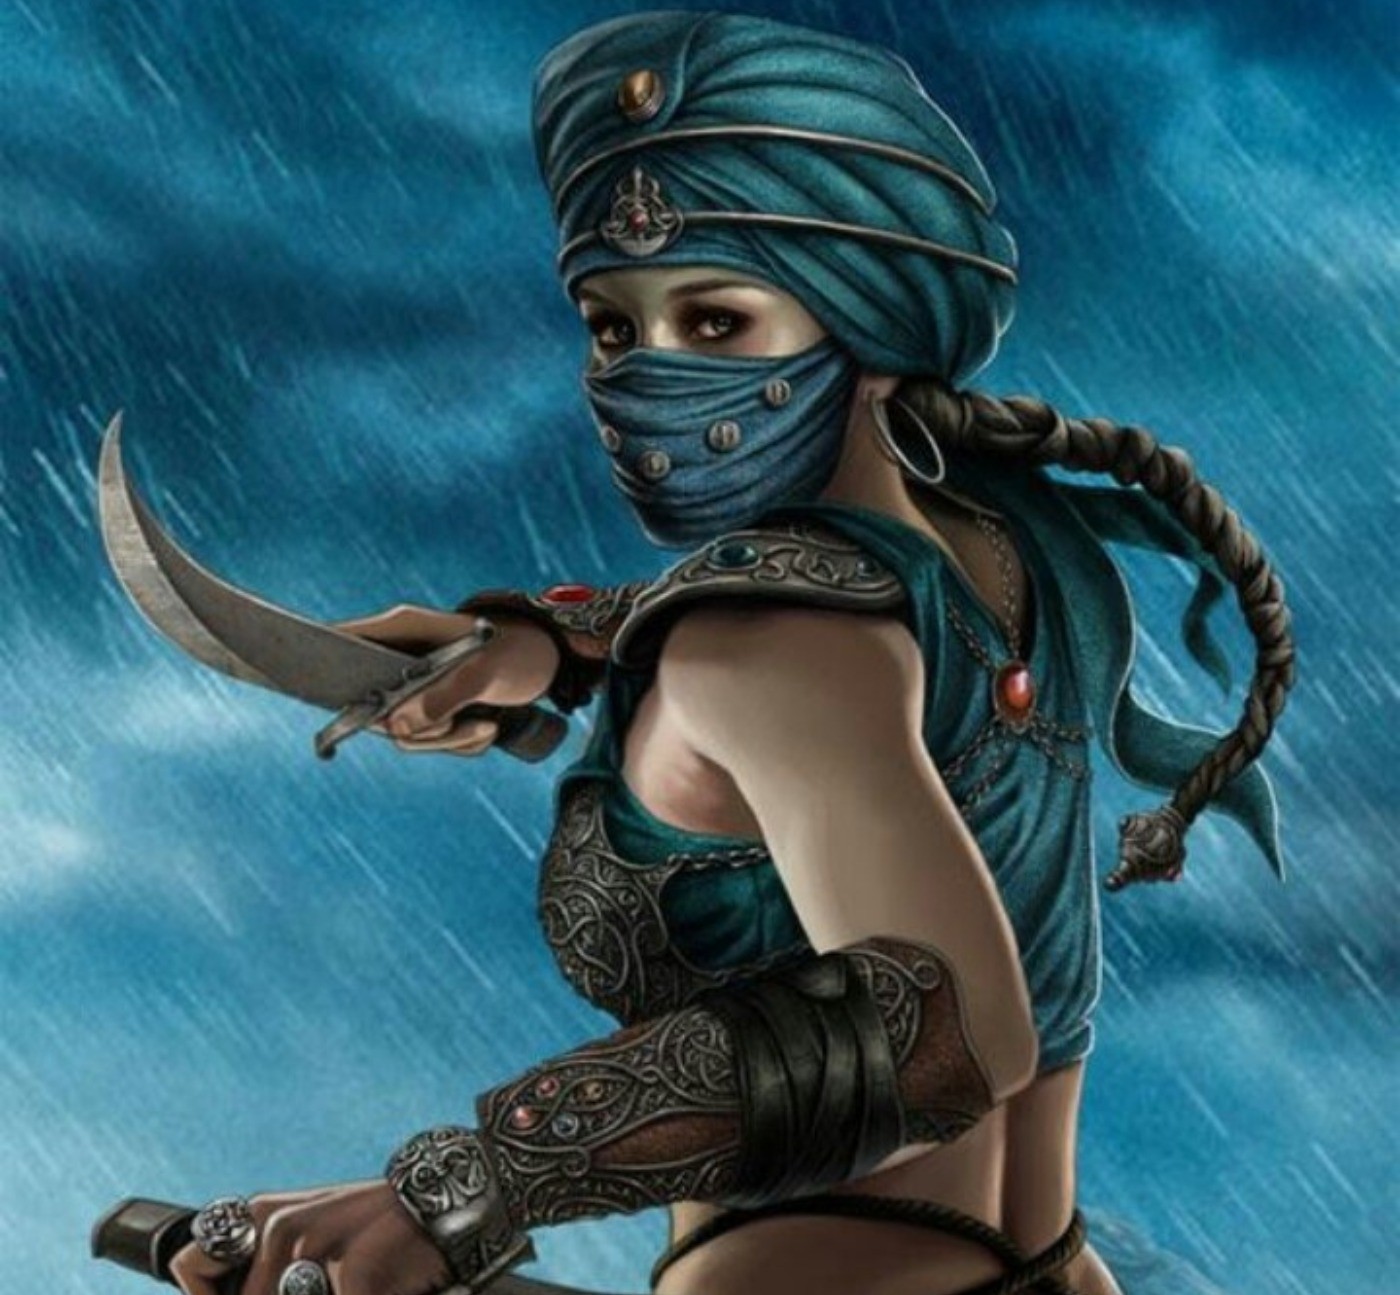 High Definition Computer Smart Phone Tablet Colourful - Middle Eastern Female Warrior - HD Wallpaper 